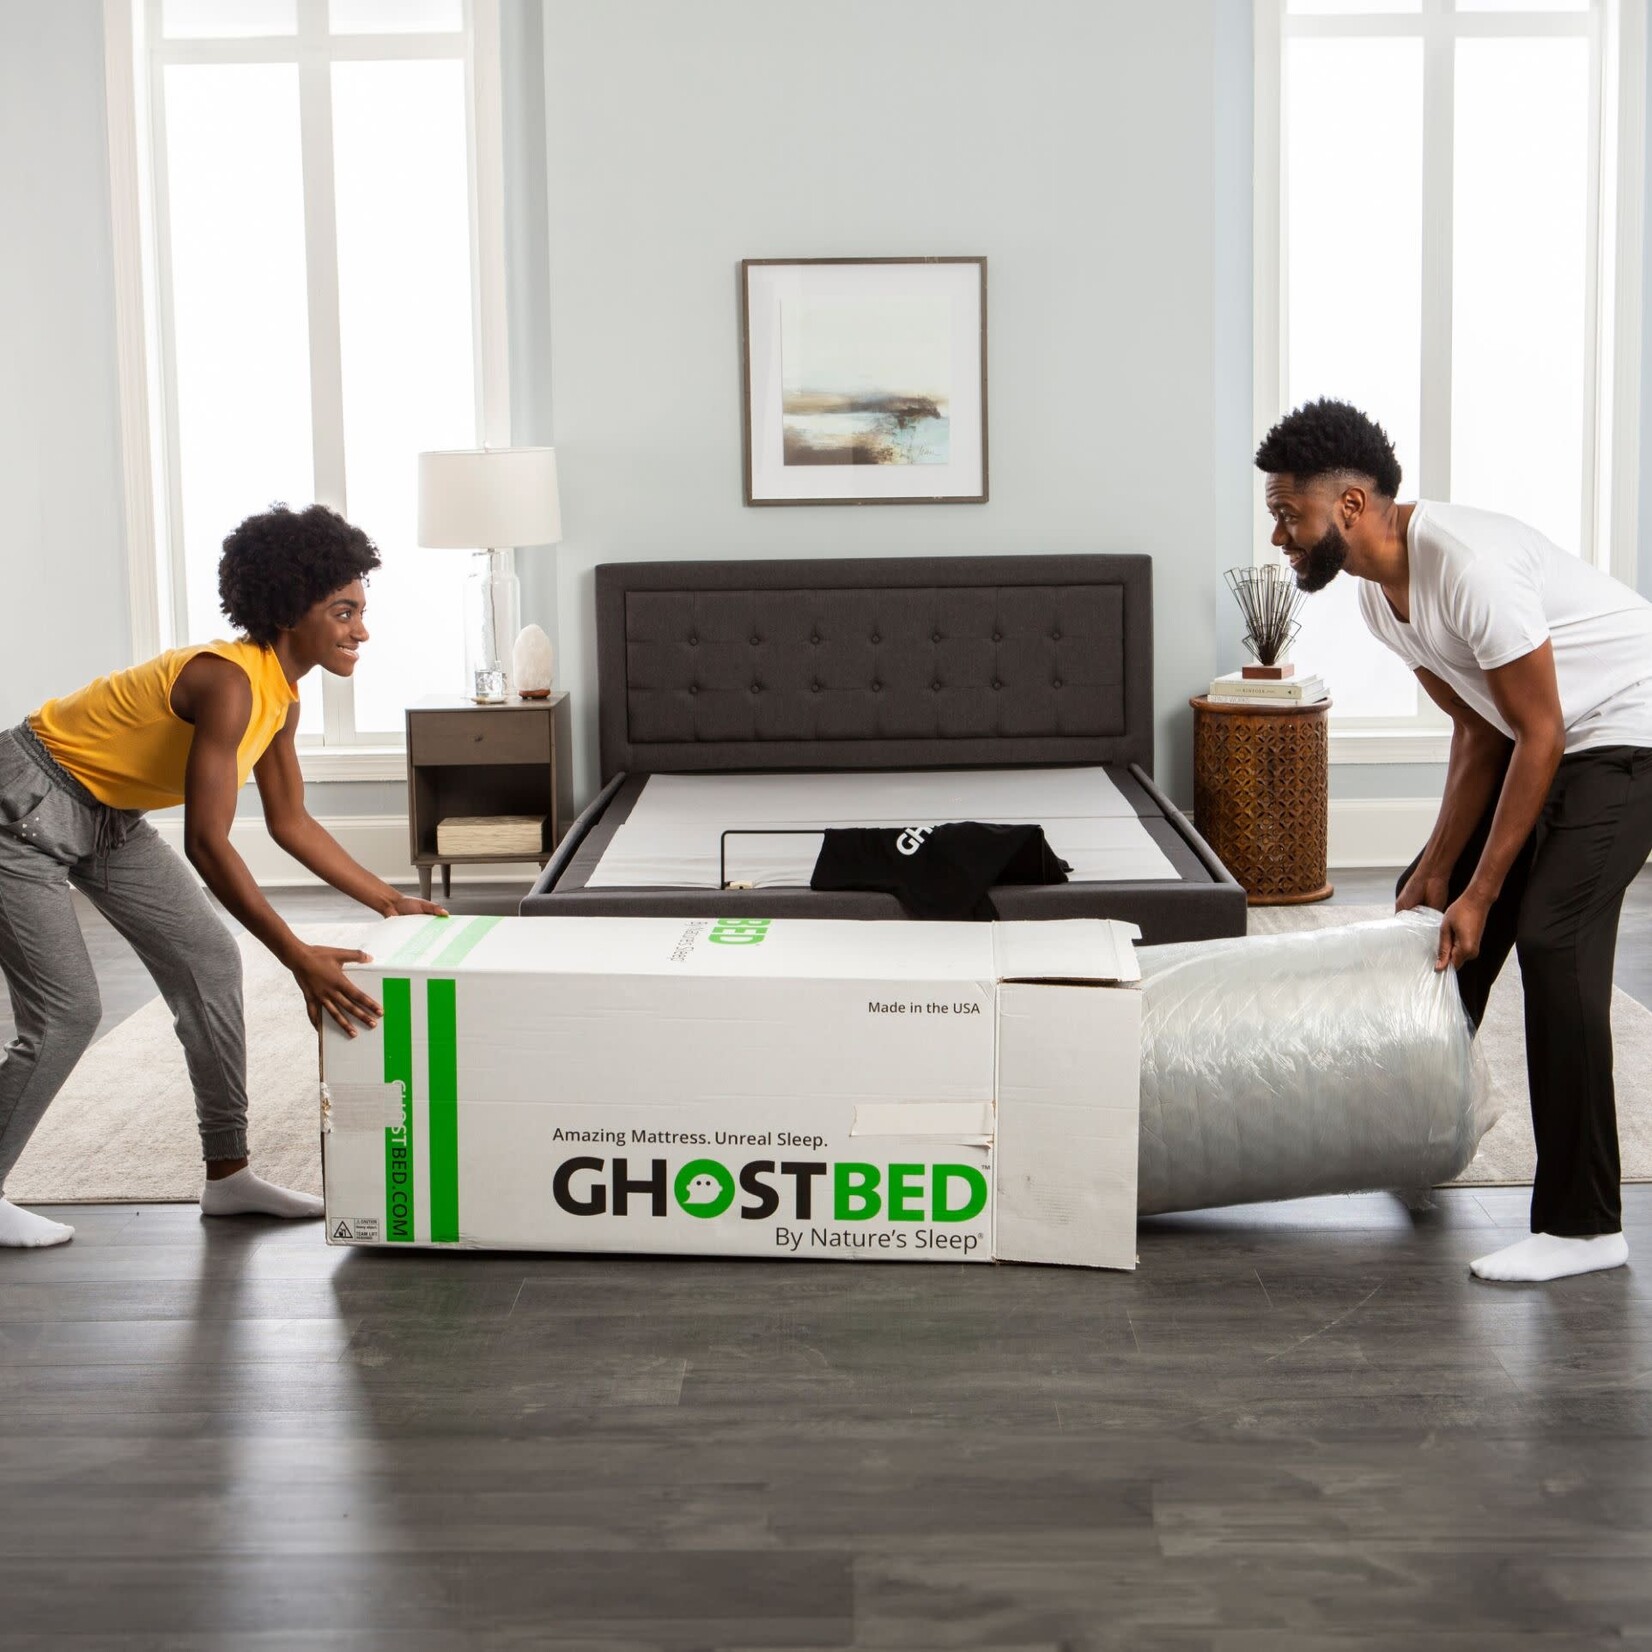 GHOSTBED GHOSTBED ORIGINAL MATTRESS